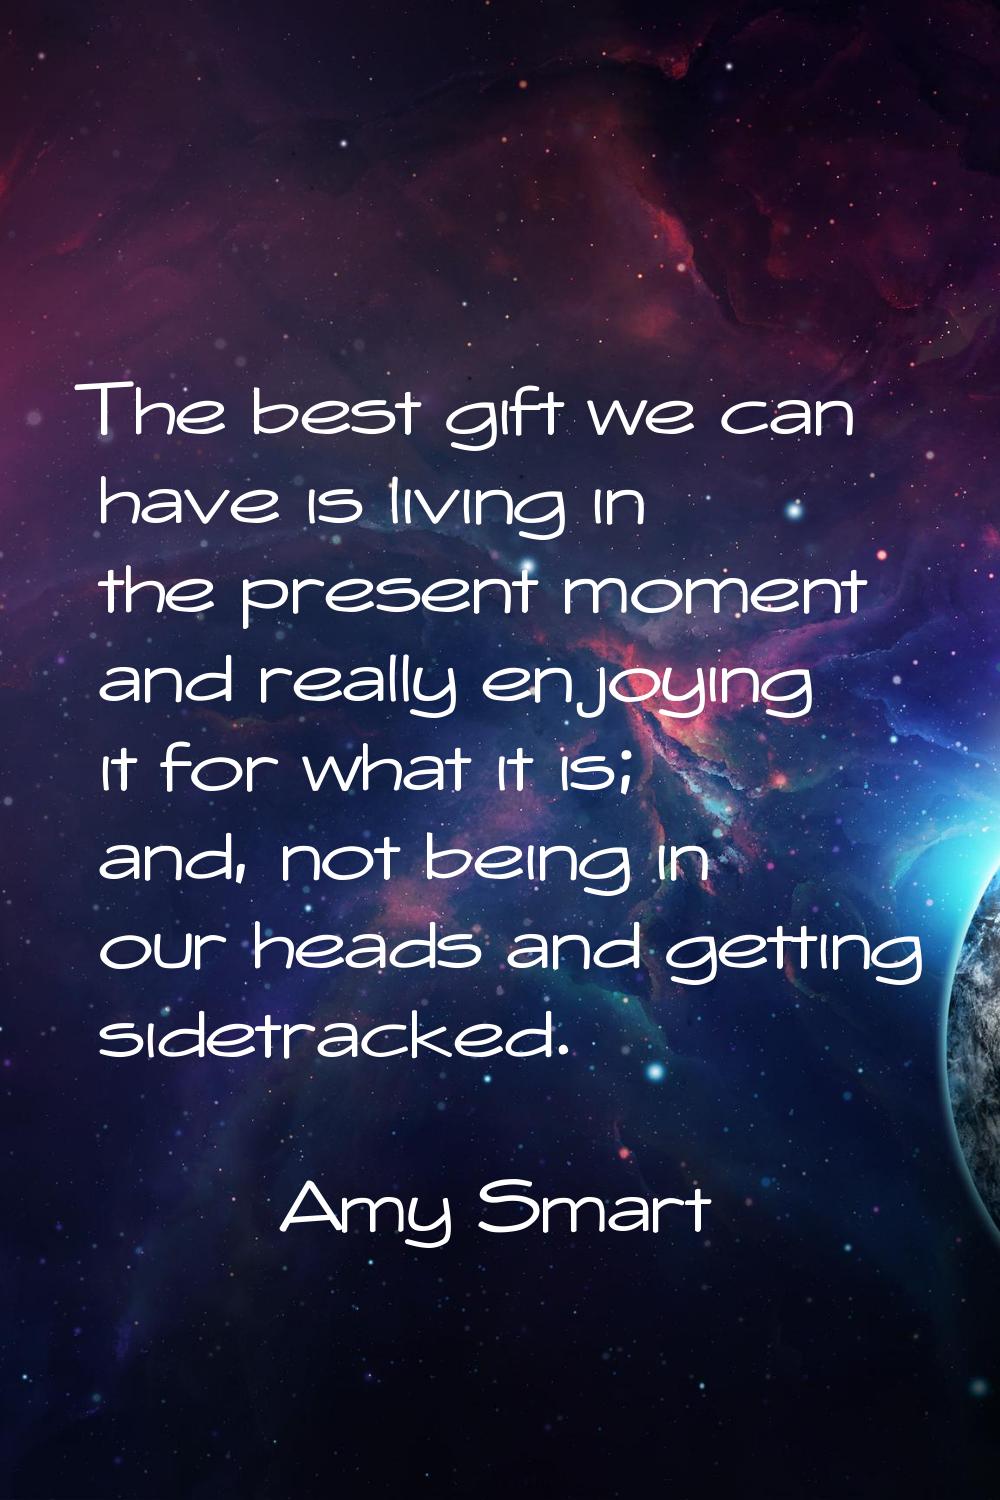 The best gift we can have is living in the present moment and really enjoying it for what it is; an